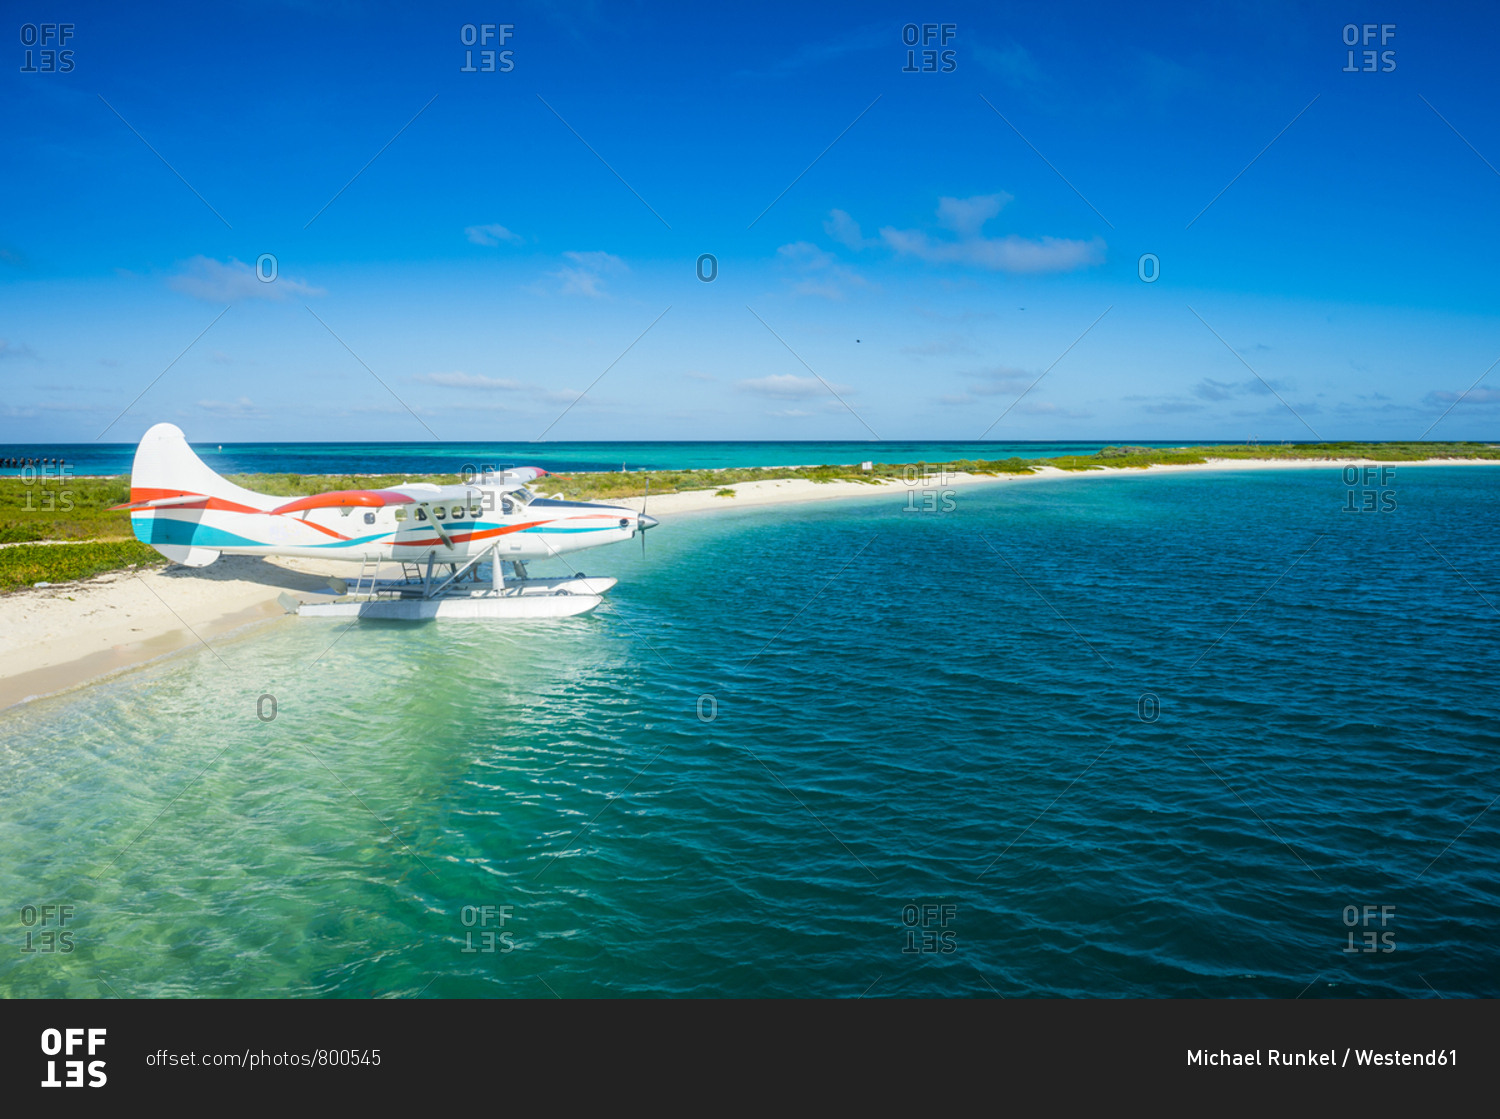 USA- Florida- Florida Keys- Dry Tortugas National Park- Water plane in the turquoise waters of Fort Jefferson